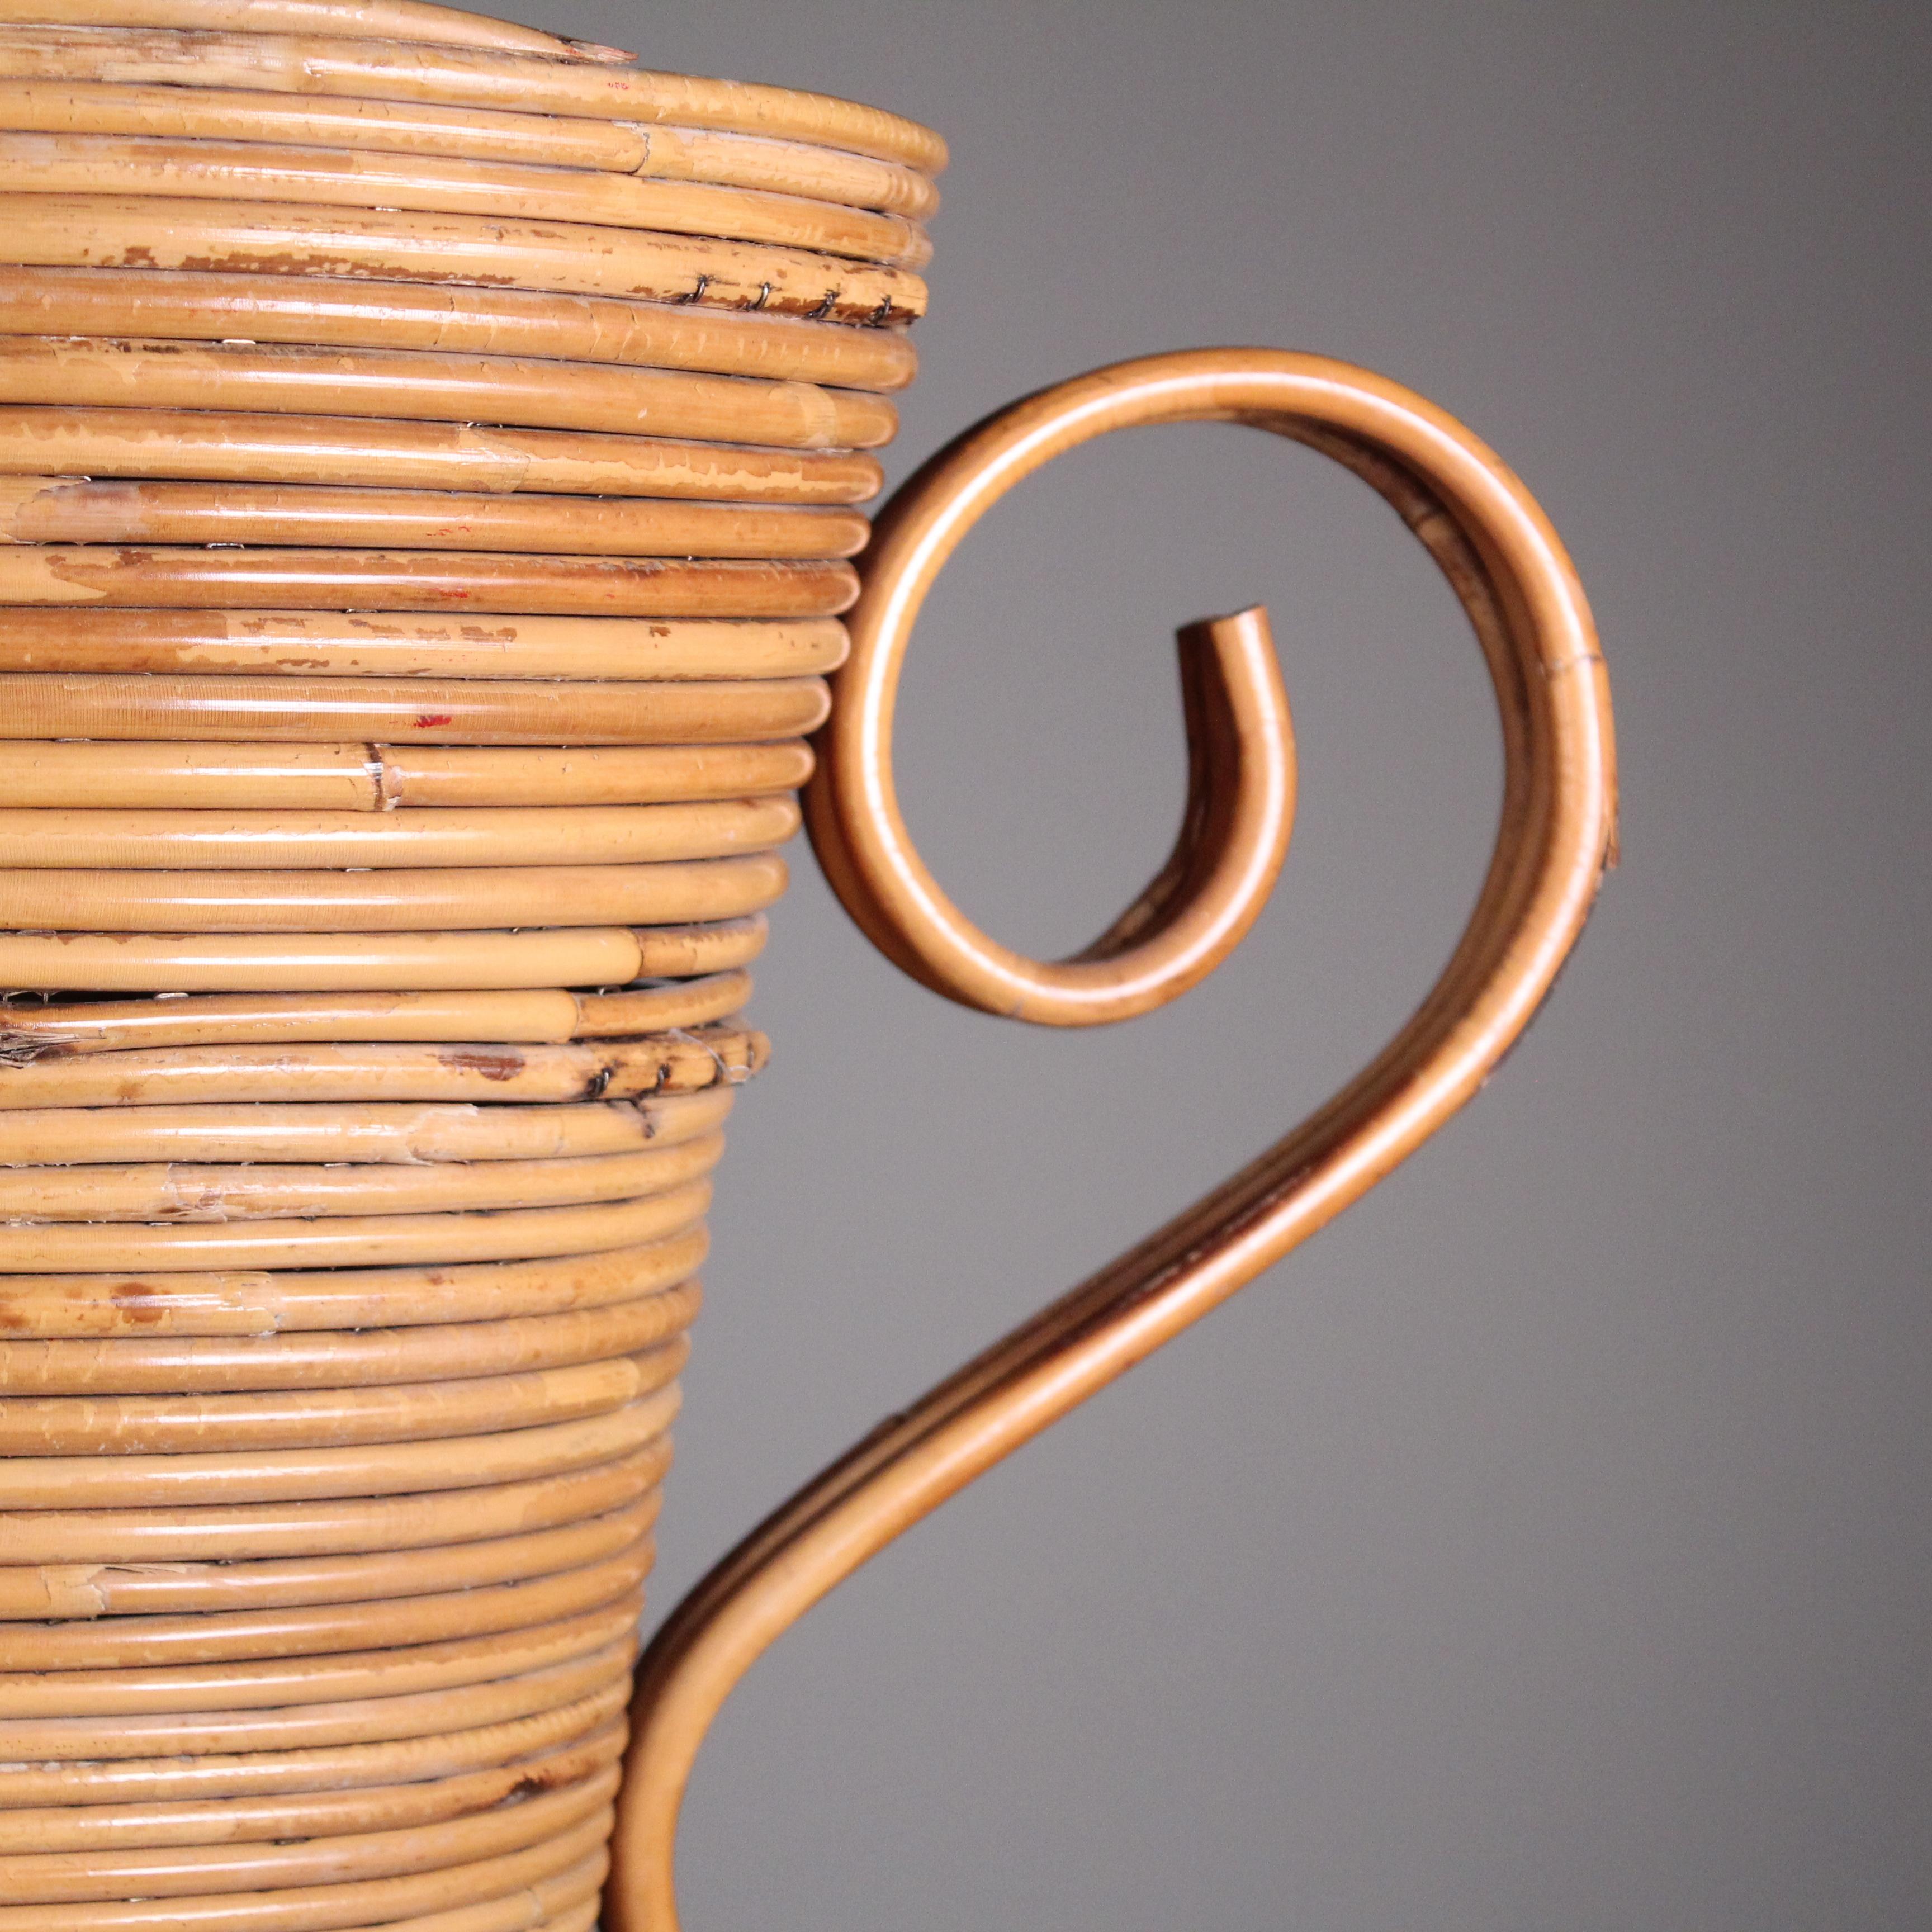 Step back into the bohemian charm of 1969 with Vivai del Sud's Rattan Vase. This design gem captures the essence of the era's laid-back sophistication, offering a nostalgic nod to the spirit of free-spirited creativity. The vase's organic rattan